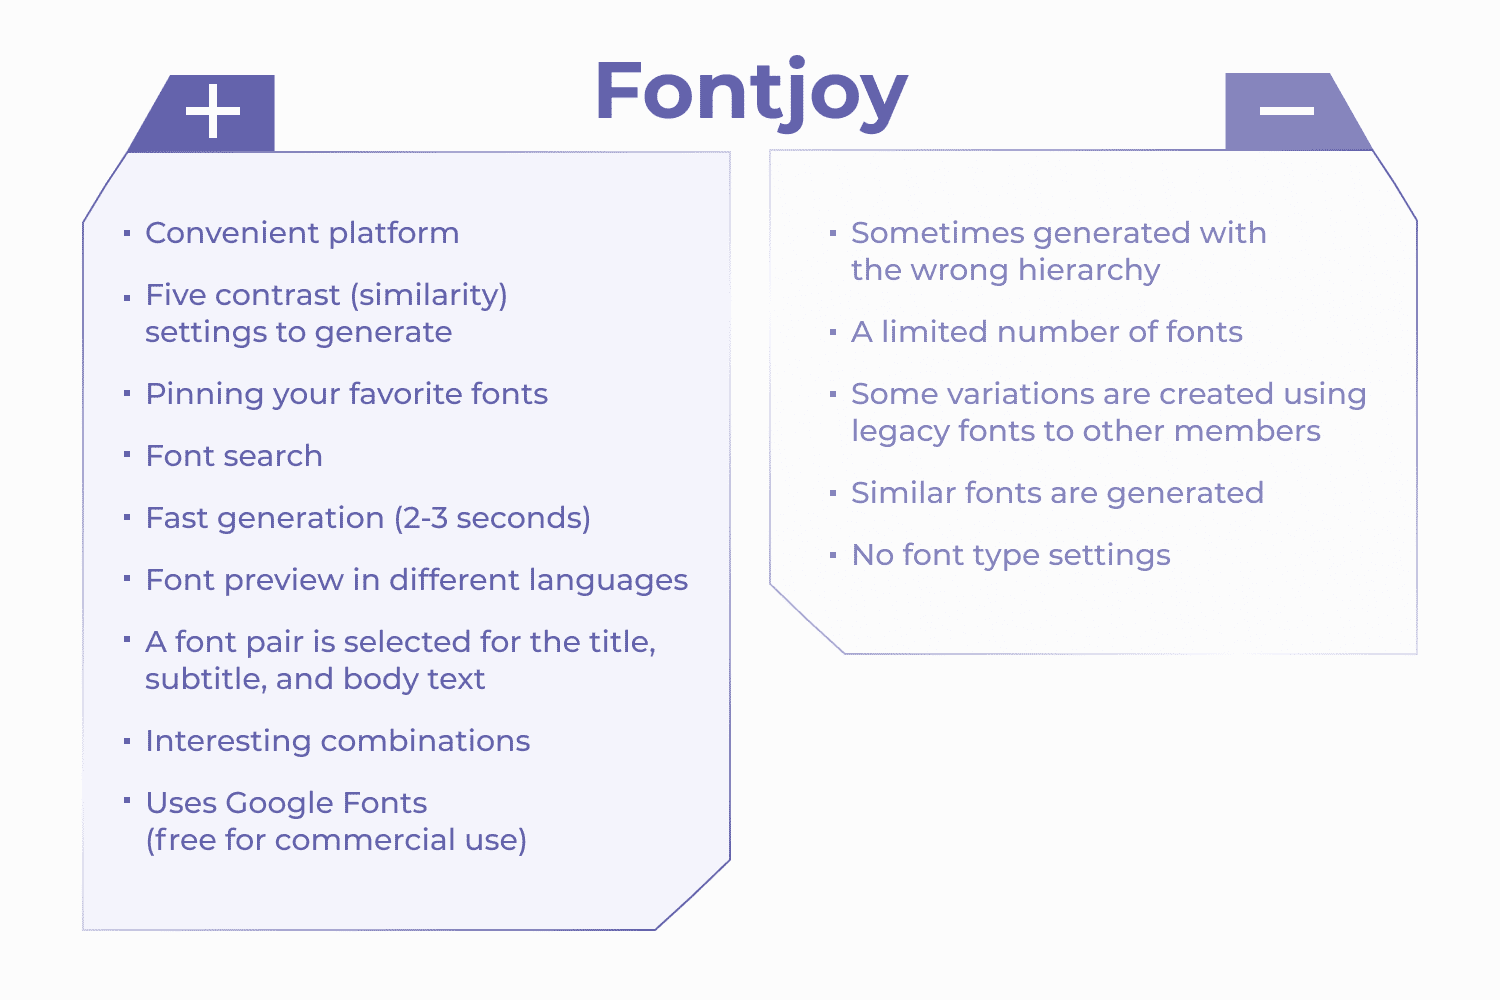 Table of advantages and disadvantages of Fontjoy.